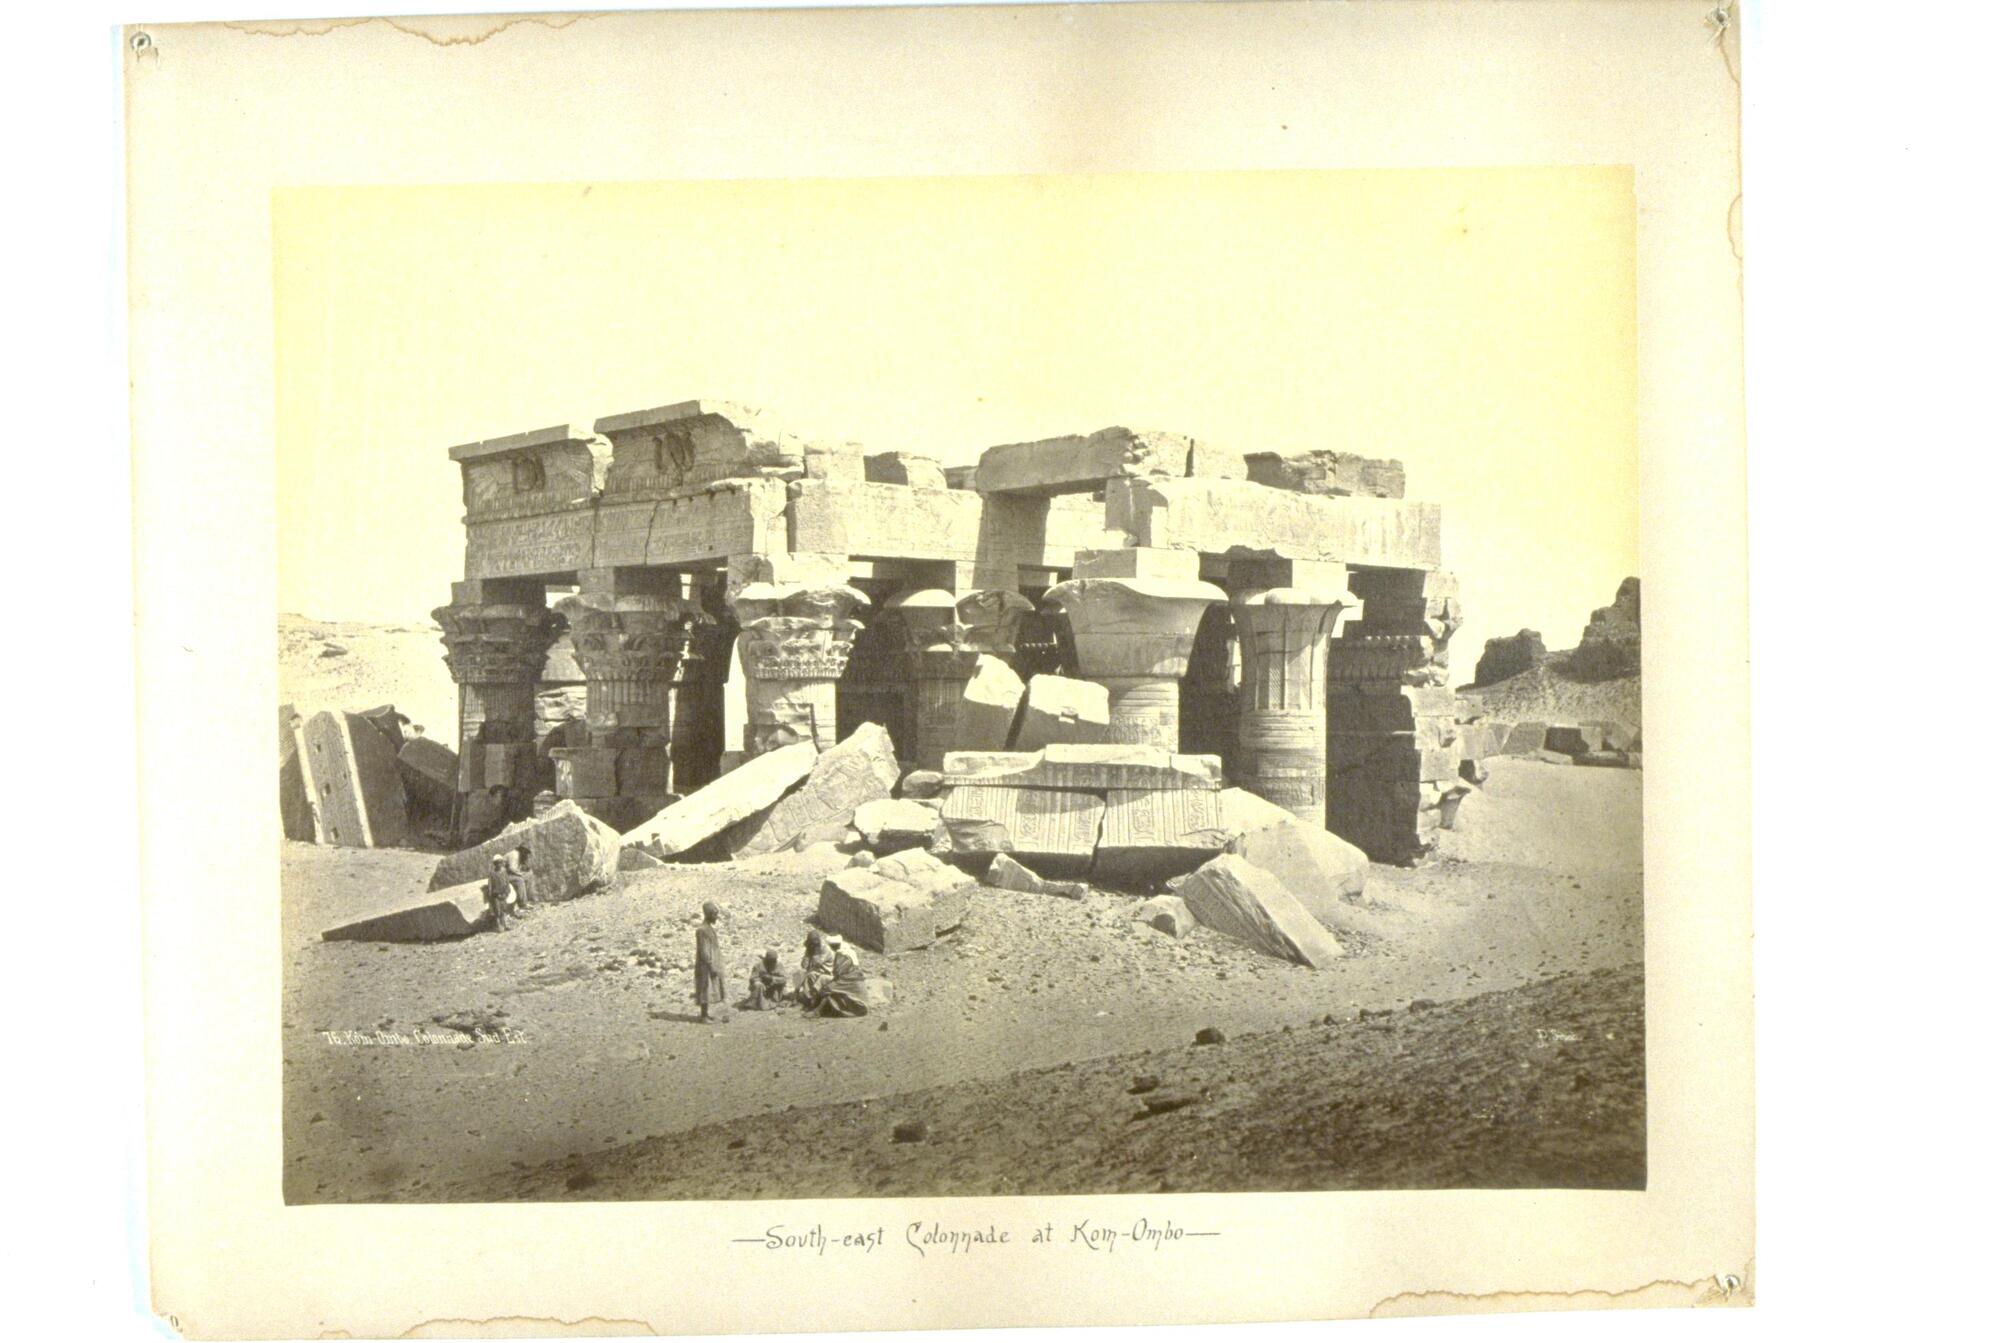 A group of columns stands amid a pile of stone debris in the desert. 